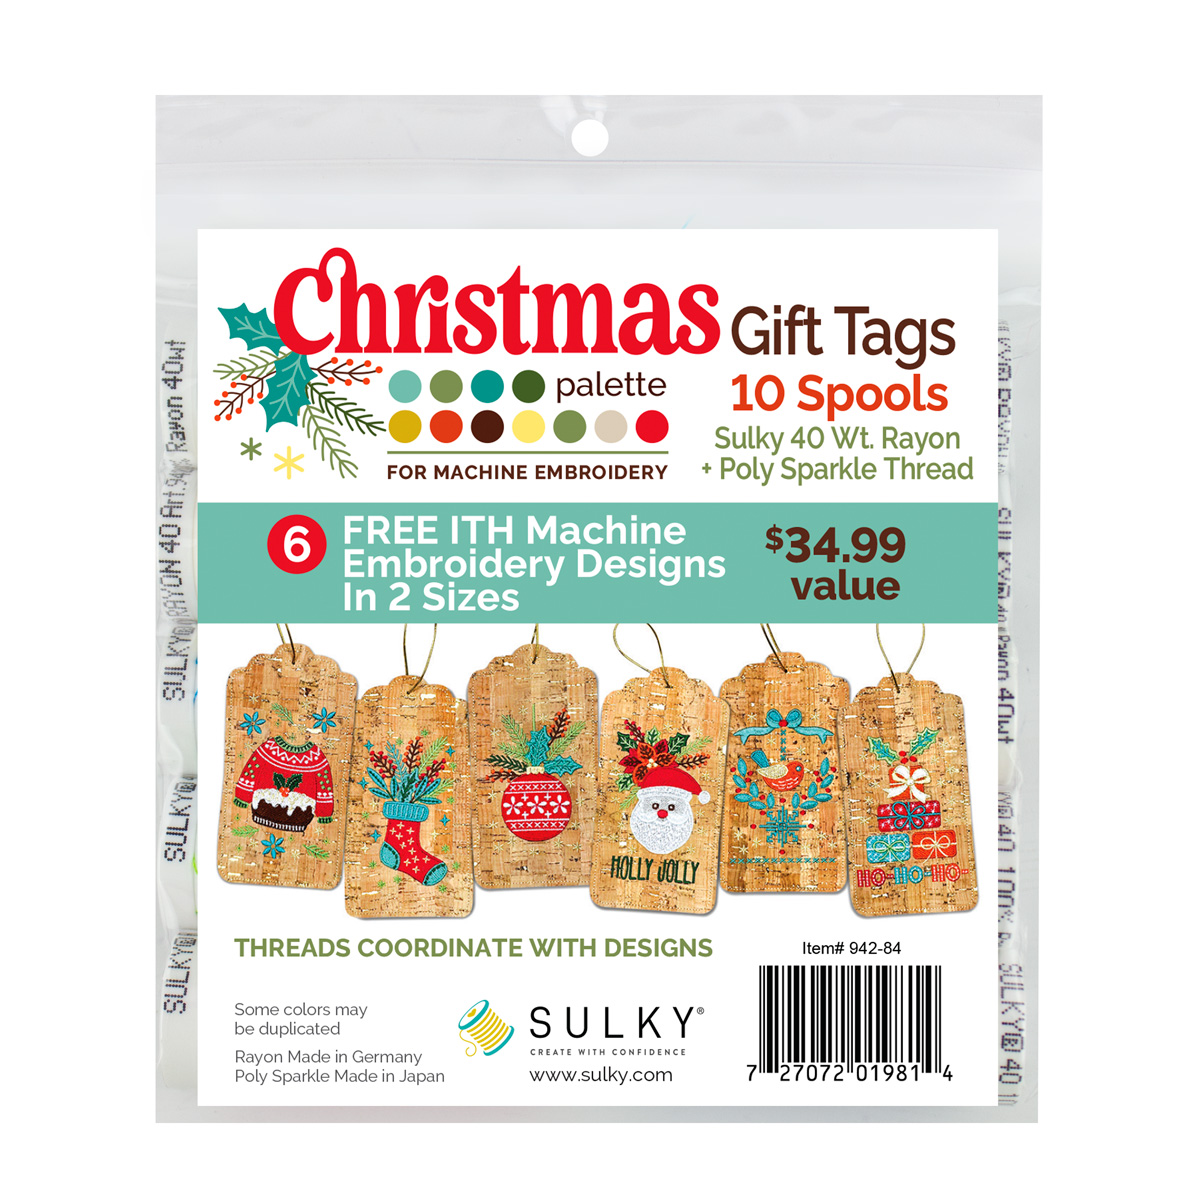 I purchased Christmas gift tags kit. where do I find the free designs?